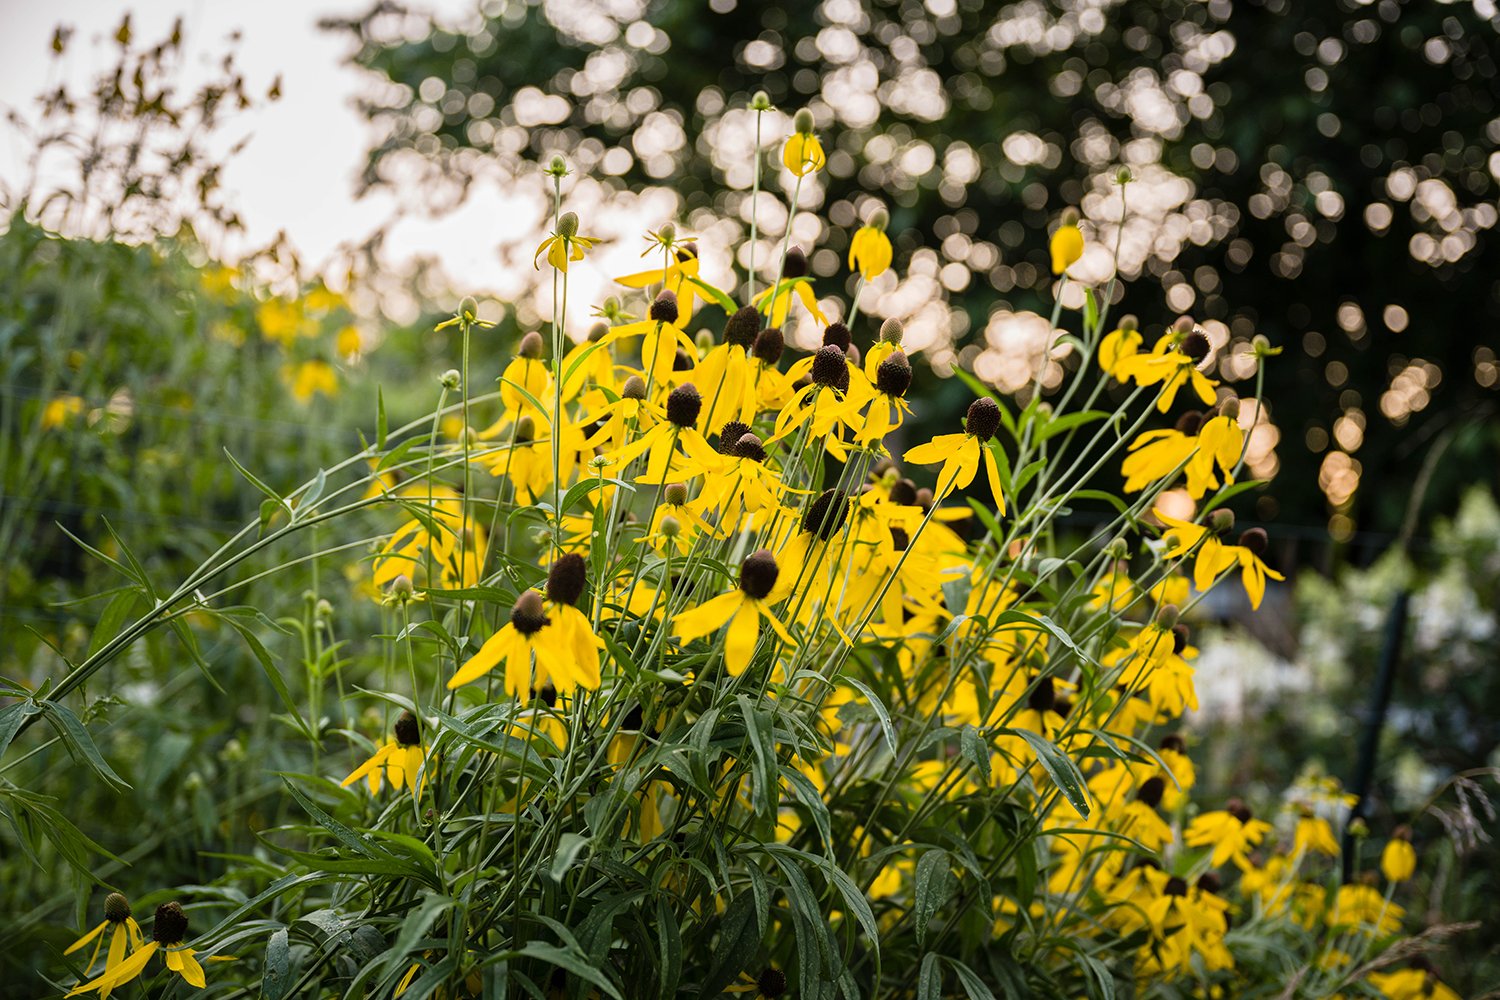 Flowers blooming as the sun rises over Fae Cottage Flower Farm in Roanoke, Virginia.